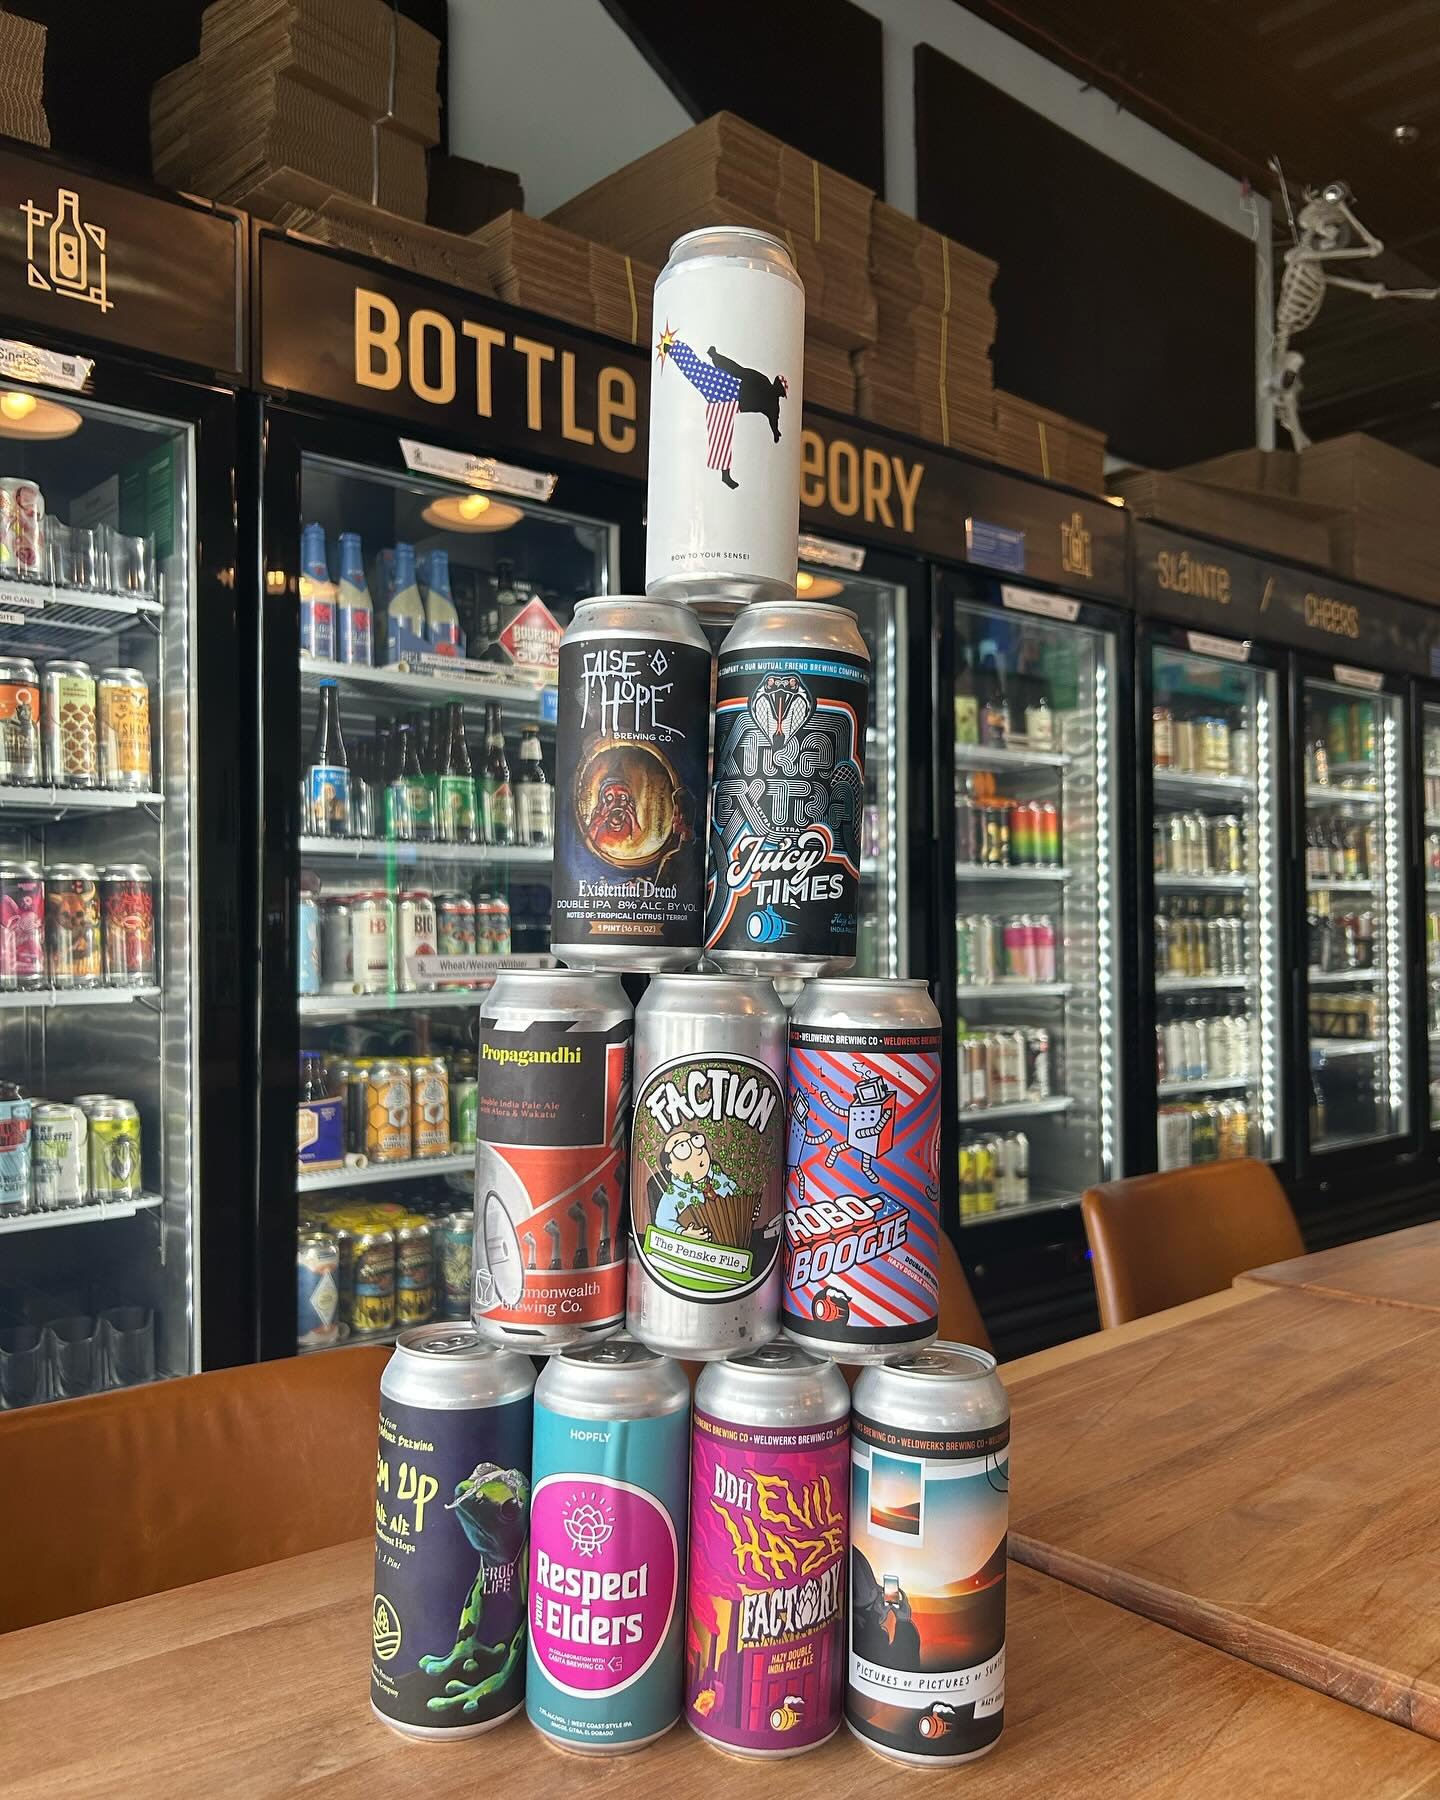 Cheers to the weekend🍻 We have tons of new beers for you all to try! 
Breweries featured: @falsehopebrewing @commonwealthbrewco @weldwerksbrewing @hopflybrewingco @eviltwinbrewingnyc @factionbrewing @toxbrewing 

#bottletheory #apexnc #carync #craft